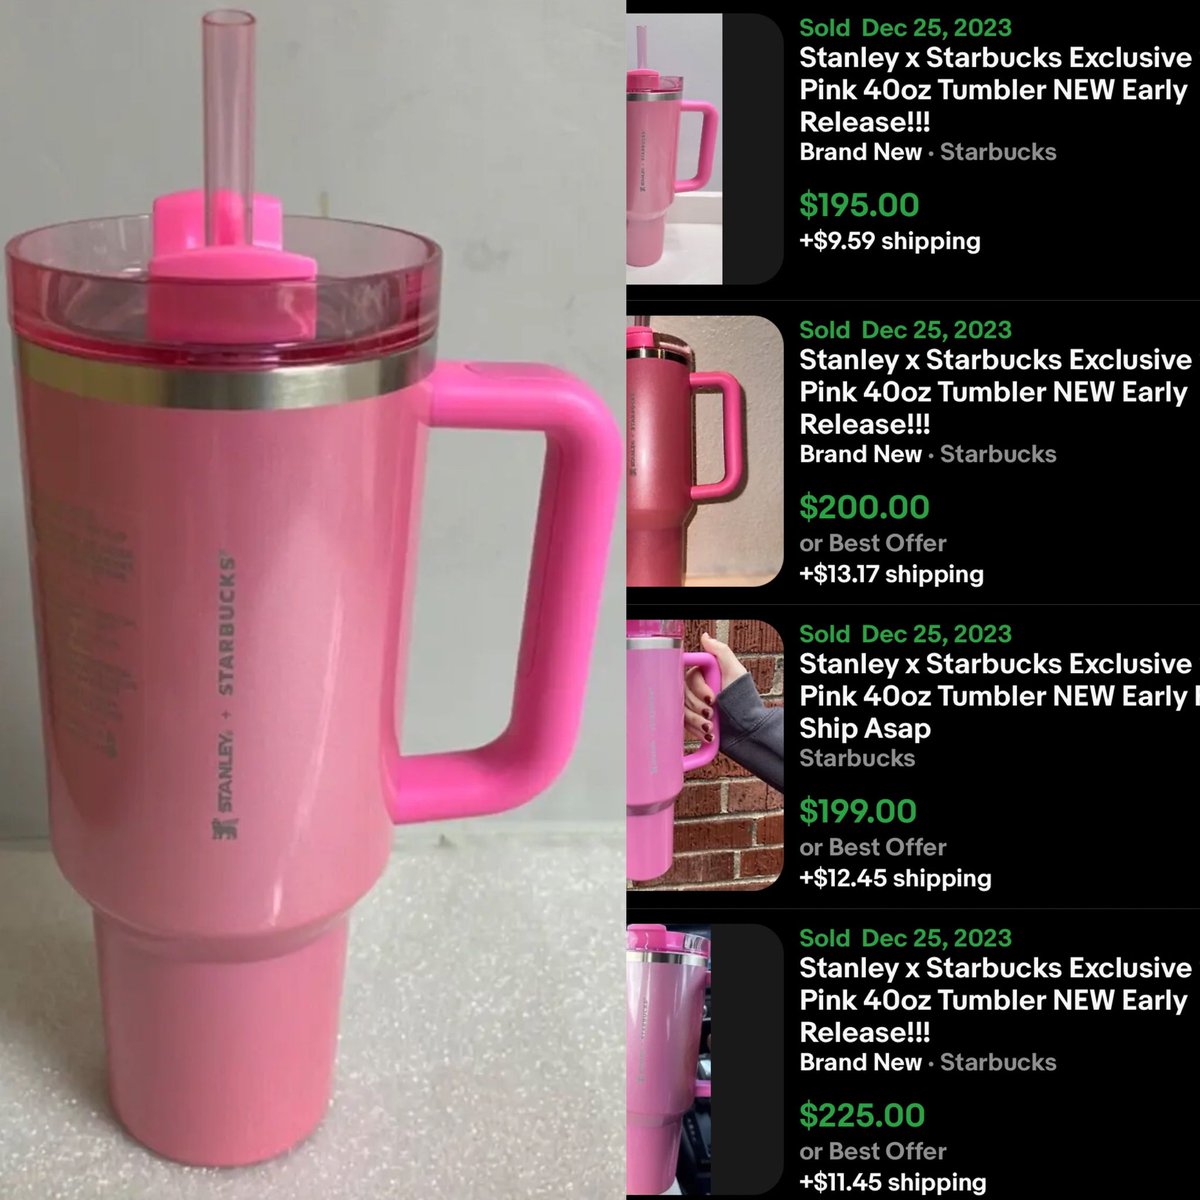 The New Starbucks X Stanley Tumblers Are Already Being Resold On